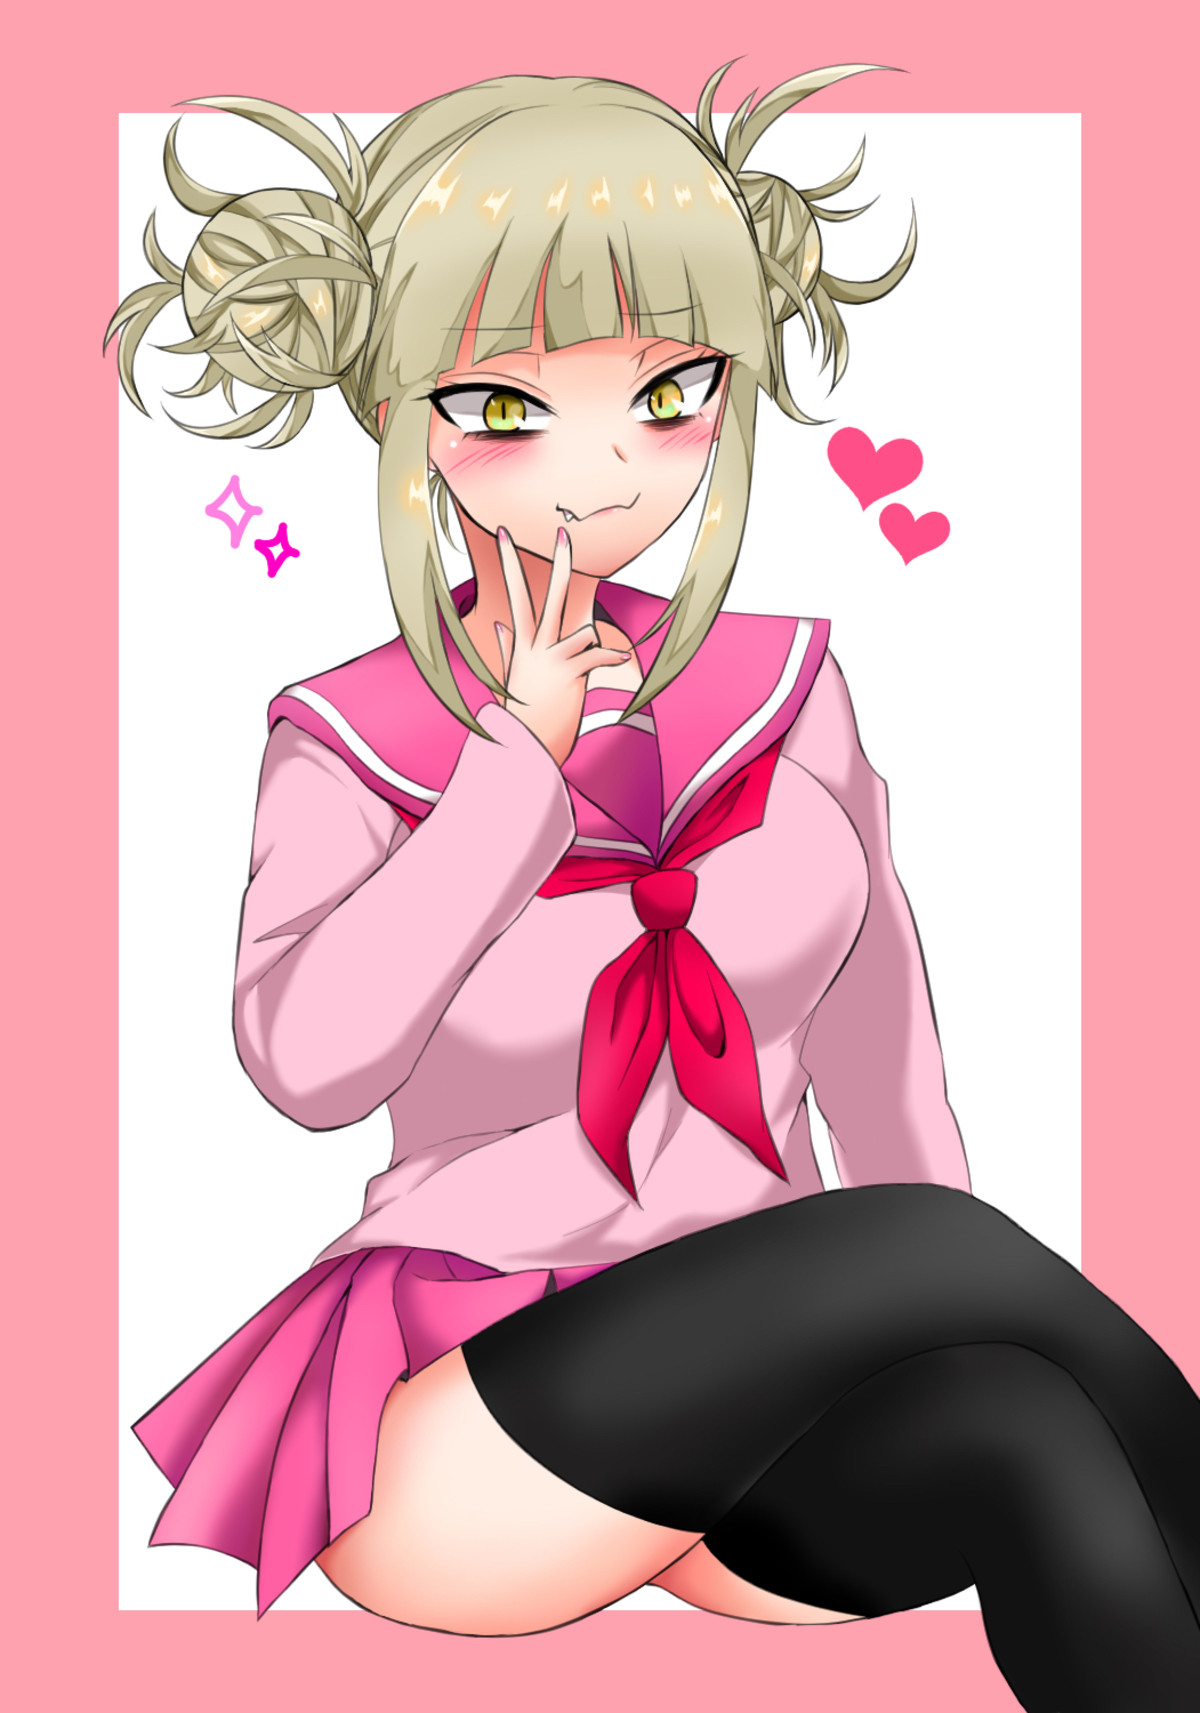 Daily Toga - 1030: Pink. join list: DailyToga (477 subs)Mention History Source: .. i'm in trouble....